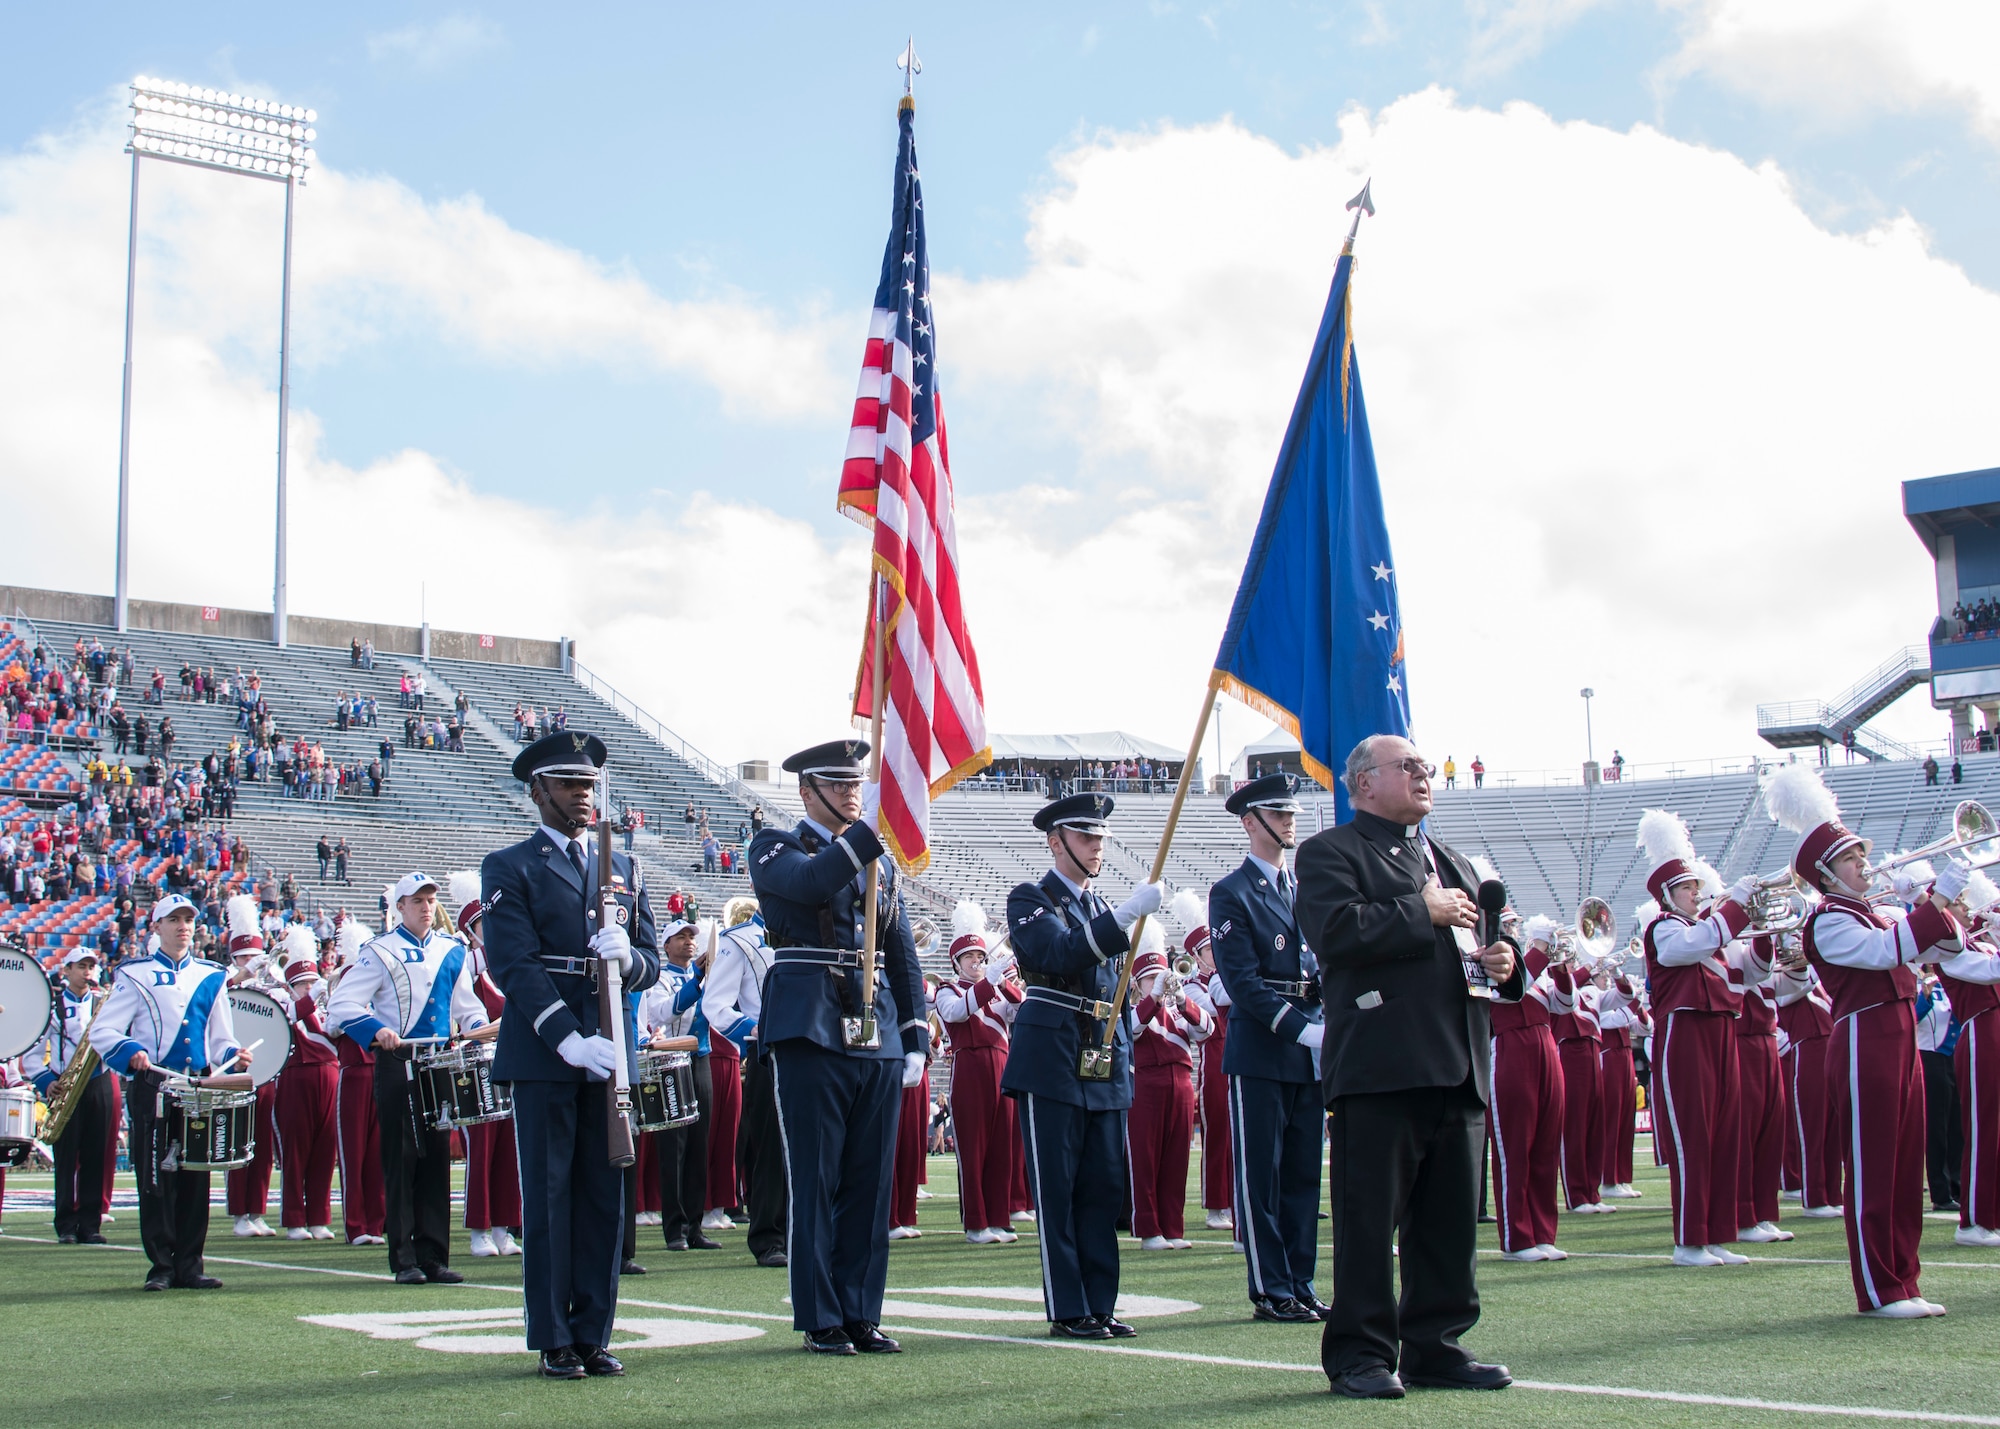 The Barksdale Air Force Base color guard presents the colors during the national anthem ahead of the 2018 Walk On’s Independence Bowl in Shreveport, Louisiana, December 27, 2018. Barksdale provided support to the bowl by providing Airmen for the color guard and trophy presentations, as well as giving the participating teams a tour of the B-52 Stratofortress and a munitions display prior to the game. (U.S. Air Force photo by Airman 1st Class Maxwell Daigle)